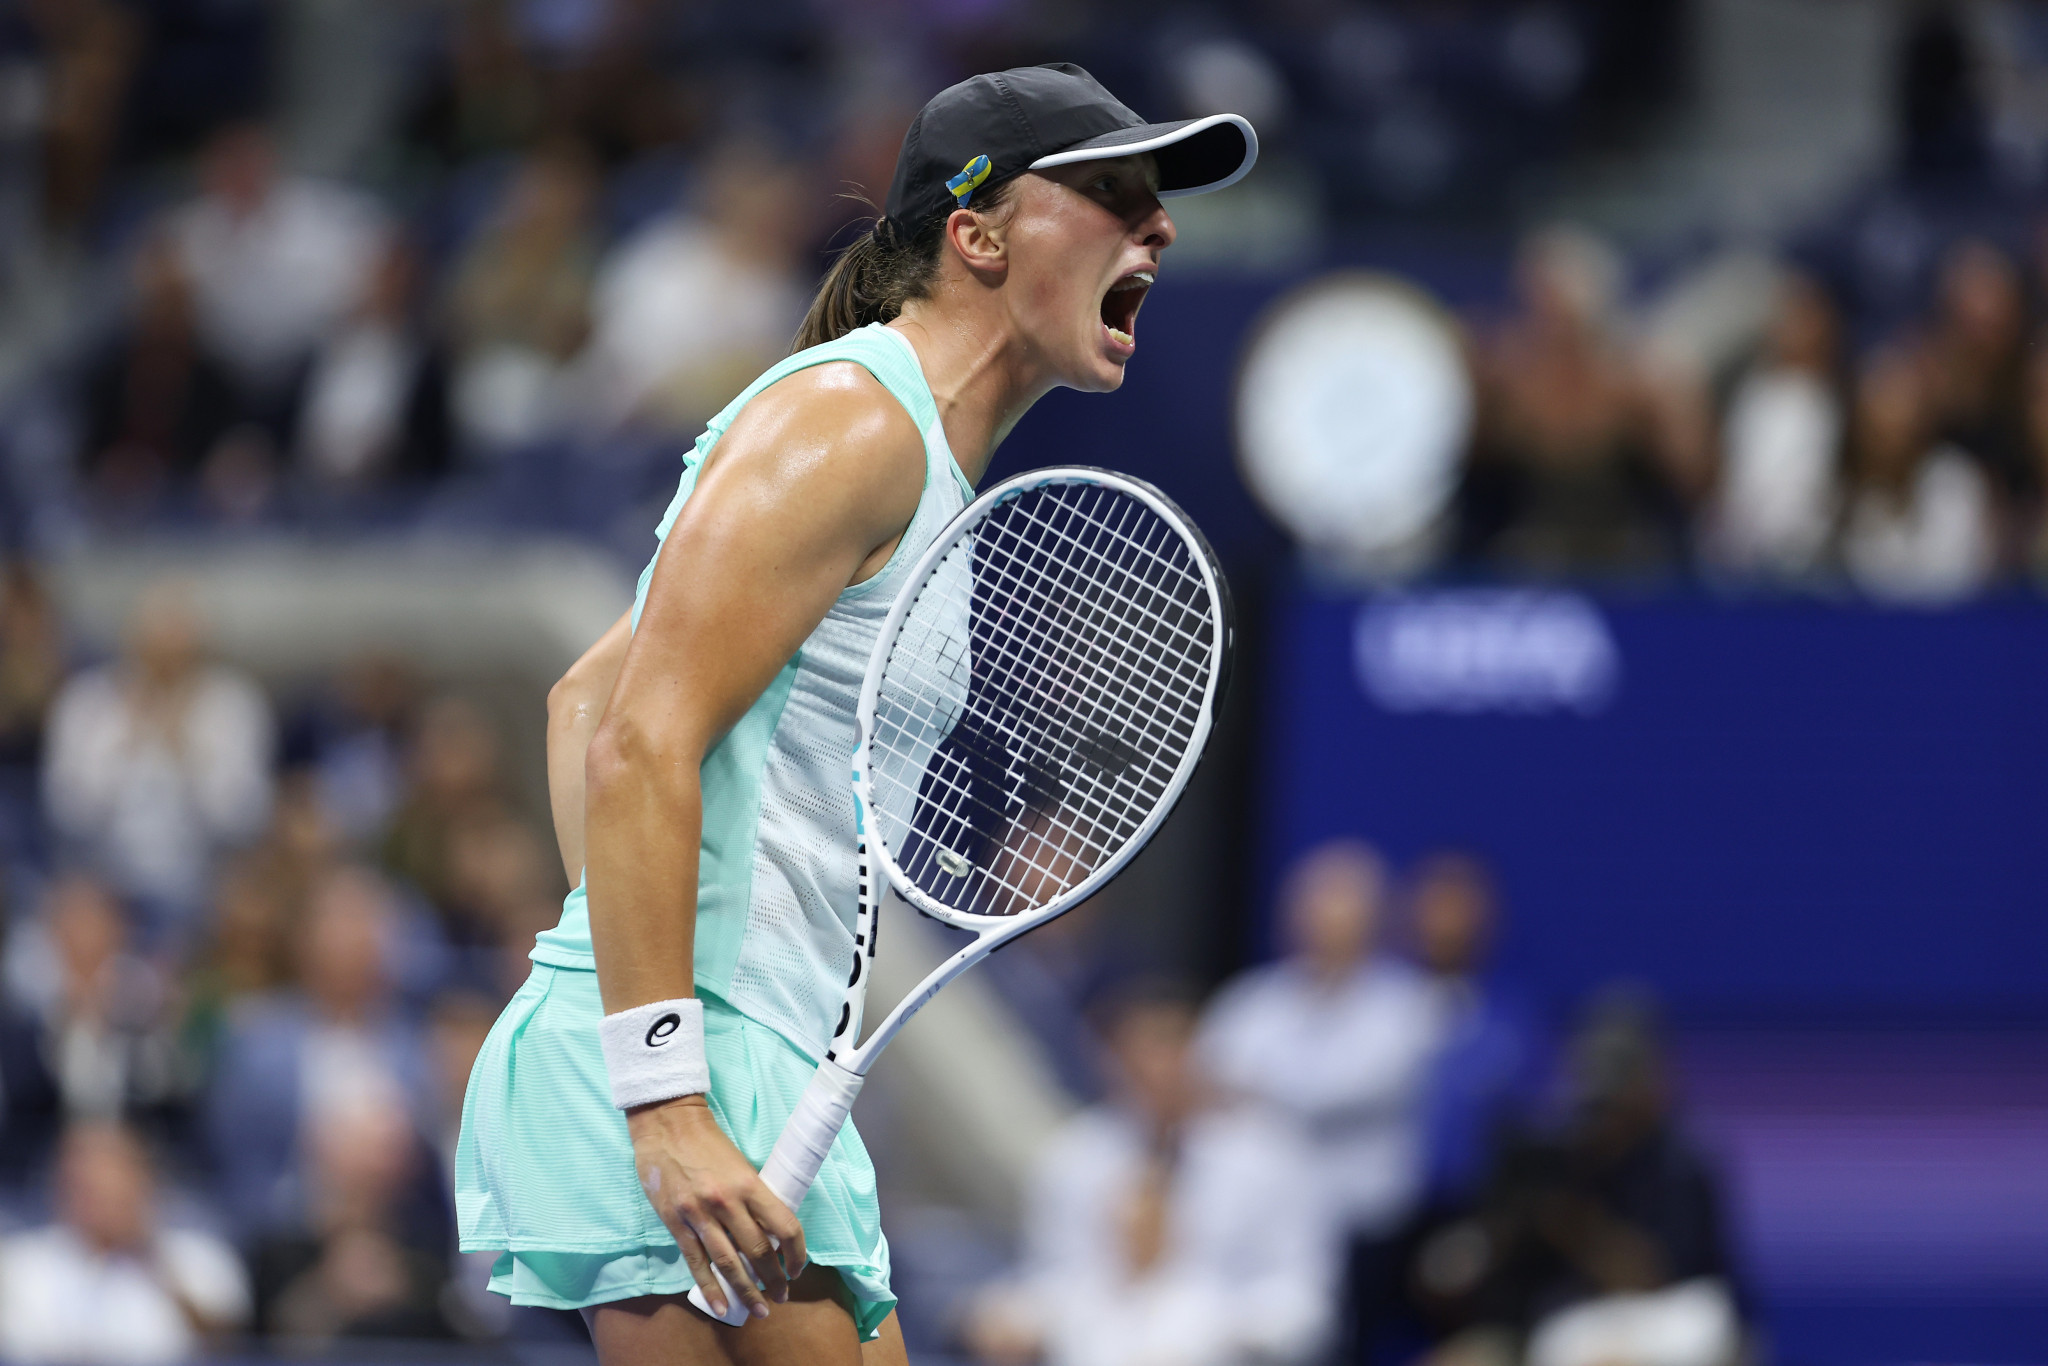 Świątek is the reigning French Open champion and another Grand Slam title in New York City would cement her status as the best women's tennis player n the world ©Getty Images